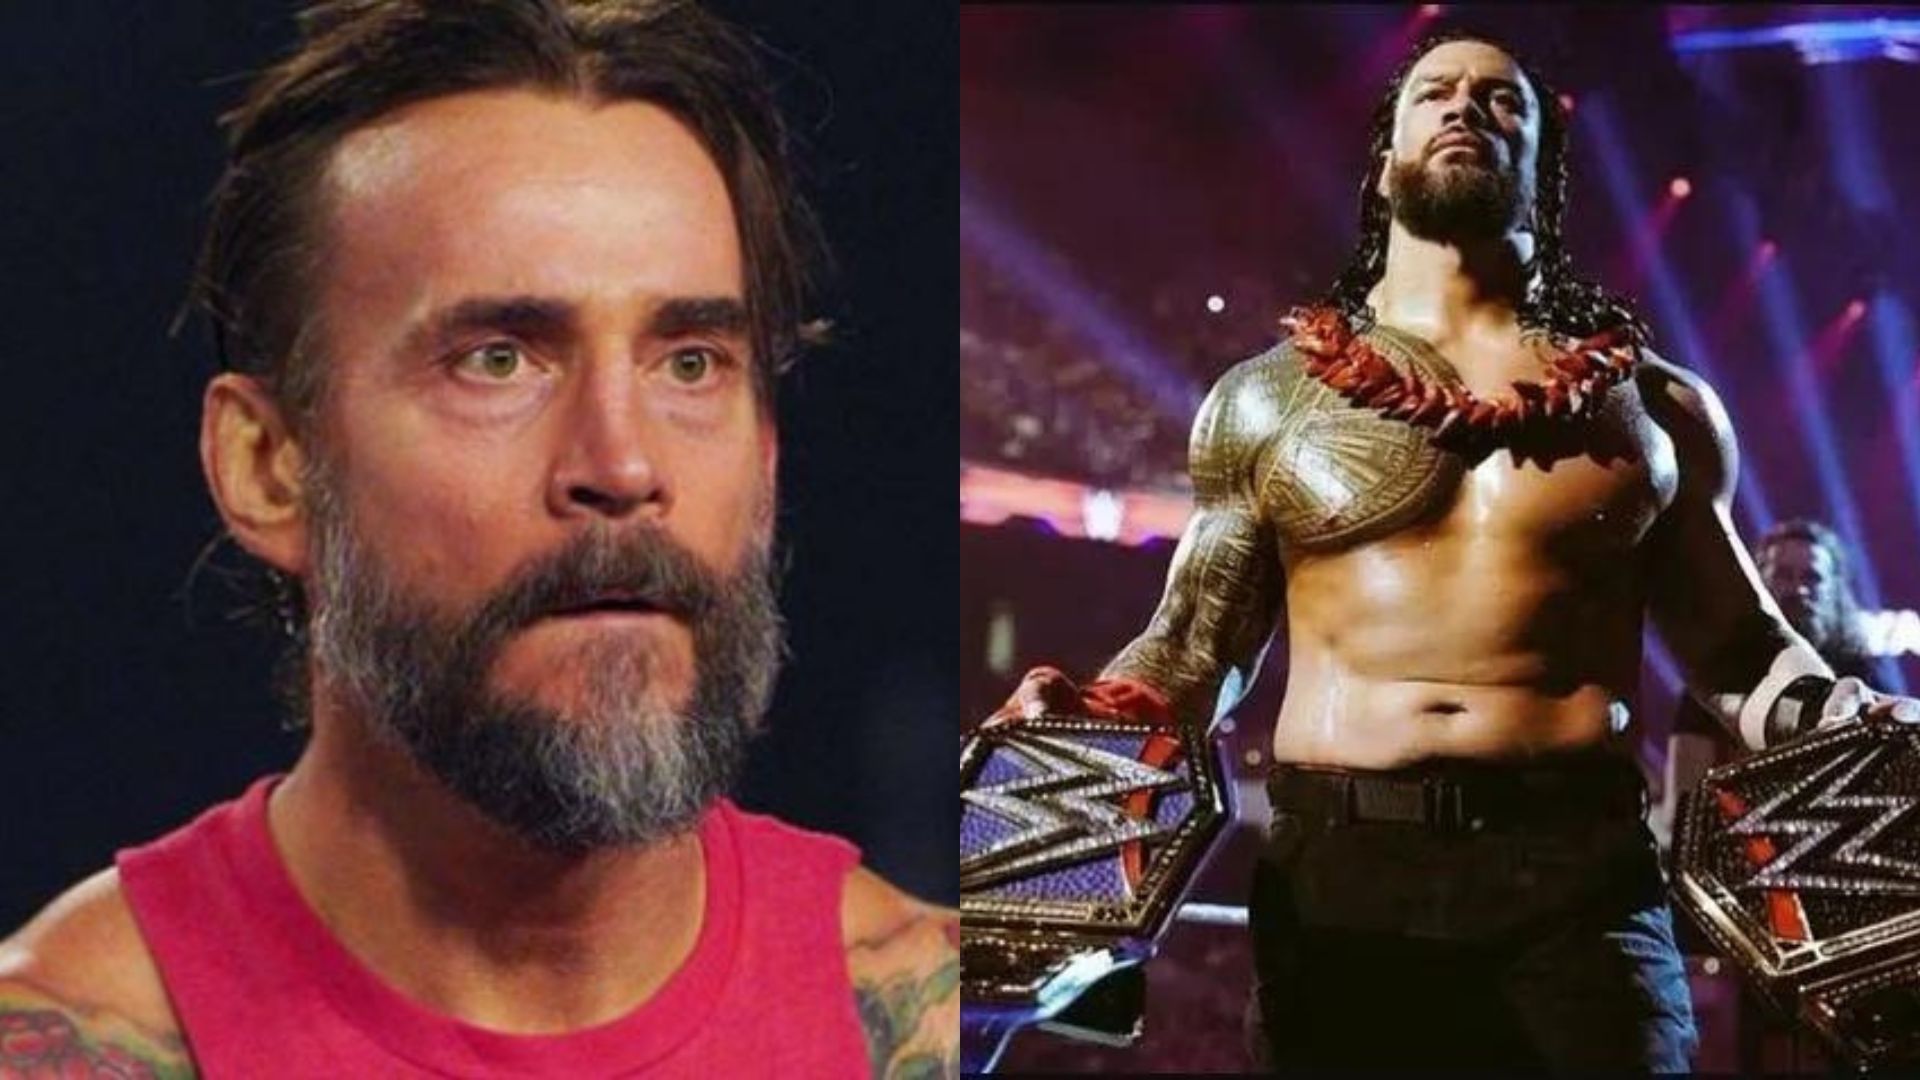 Will CM Punk return to WWE and feud with Roman Reigns?